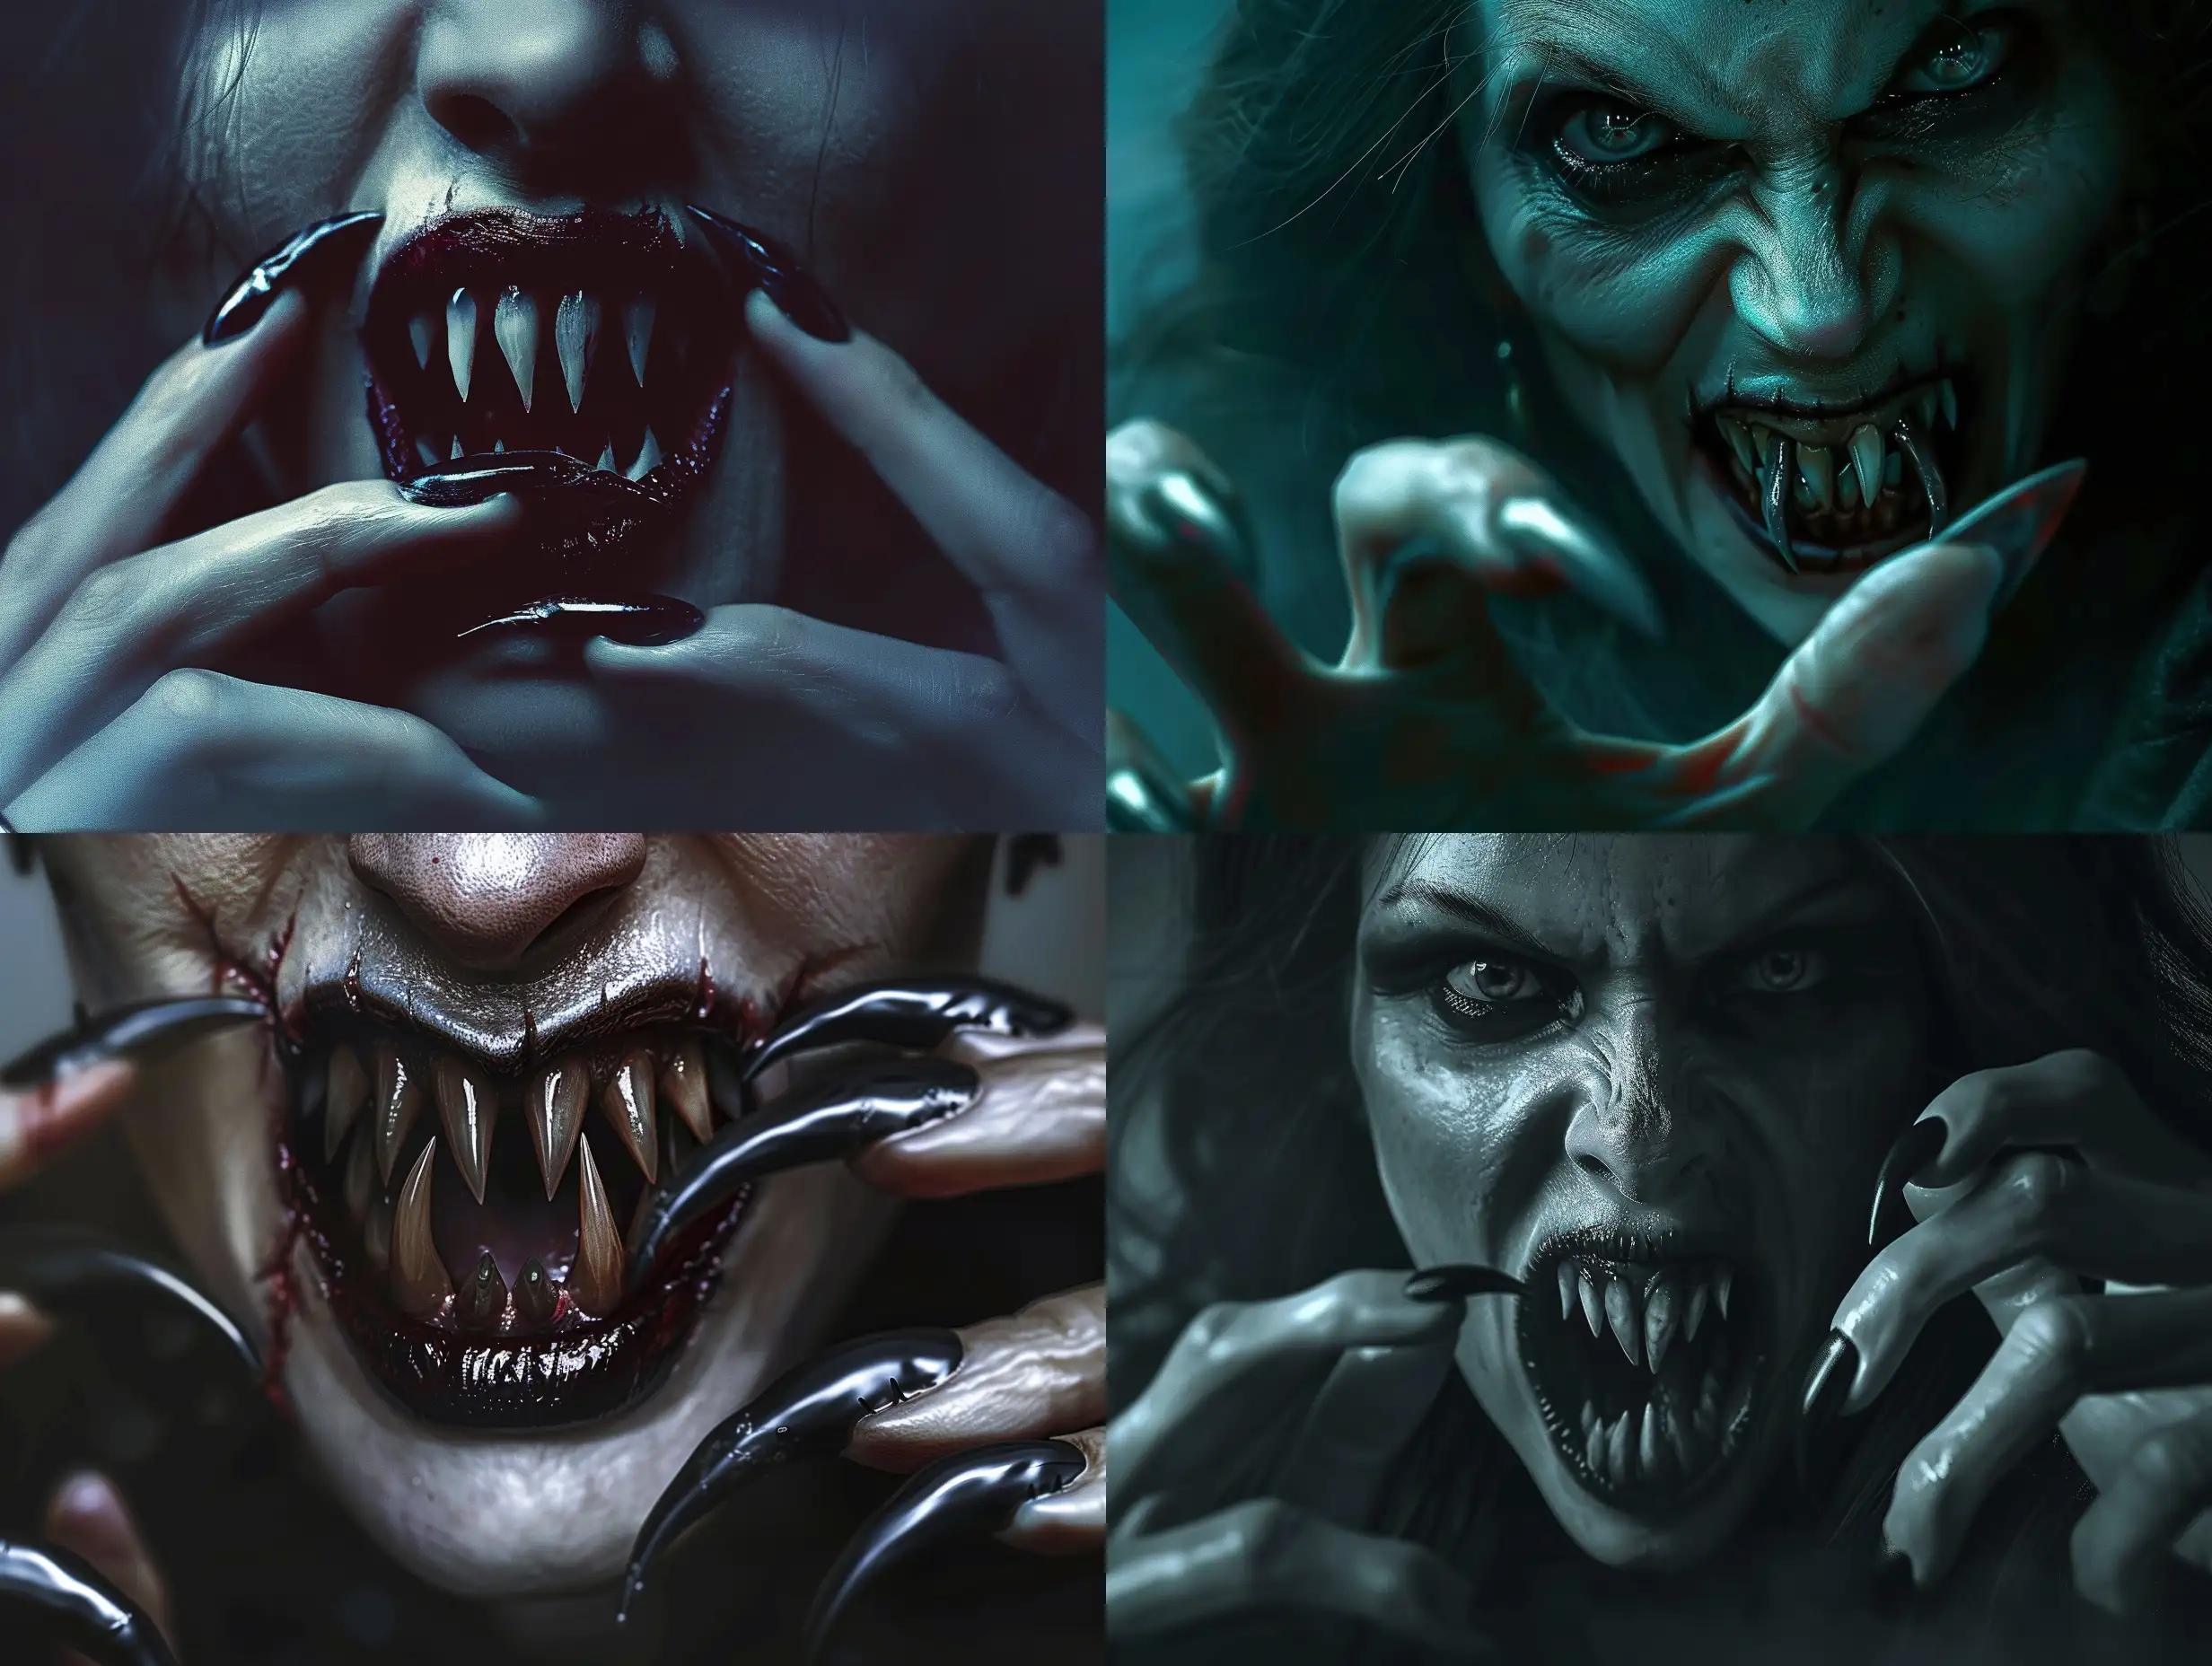 Terrifying-Monstrous-Female-Vampire-with-Pointed-Nails-in-Dark-Atmosphere